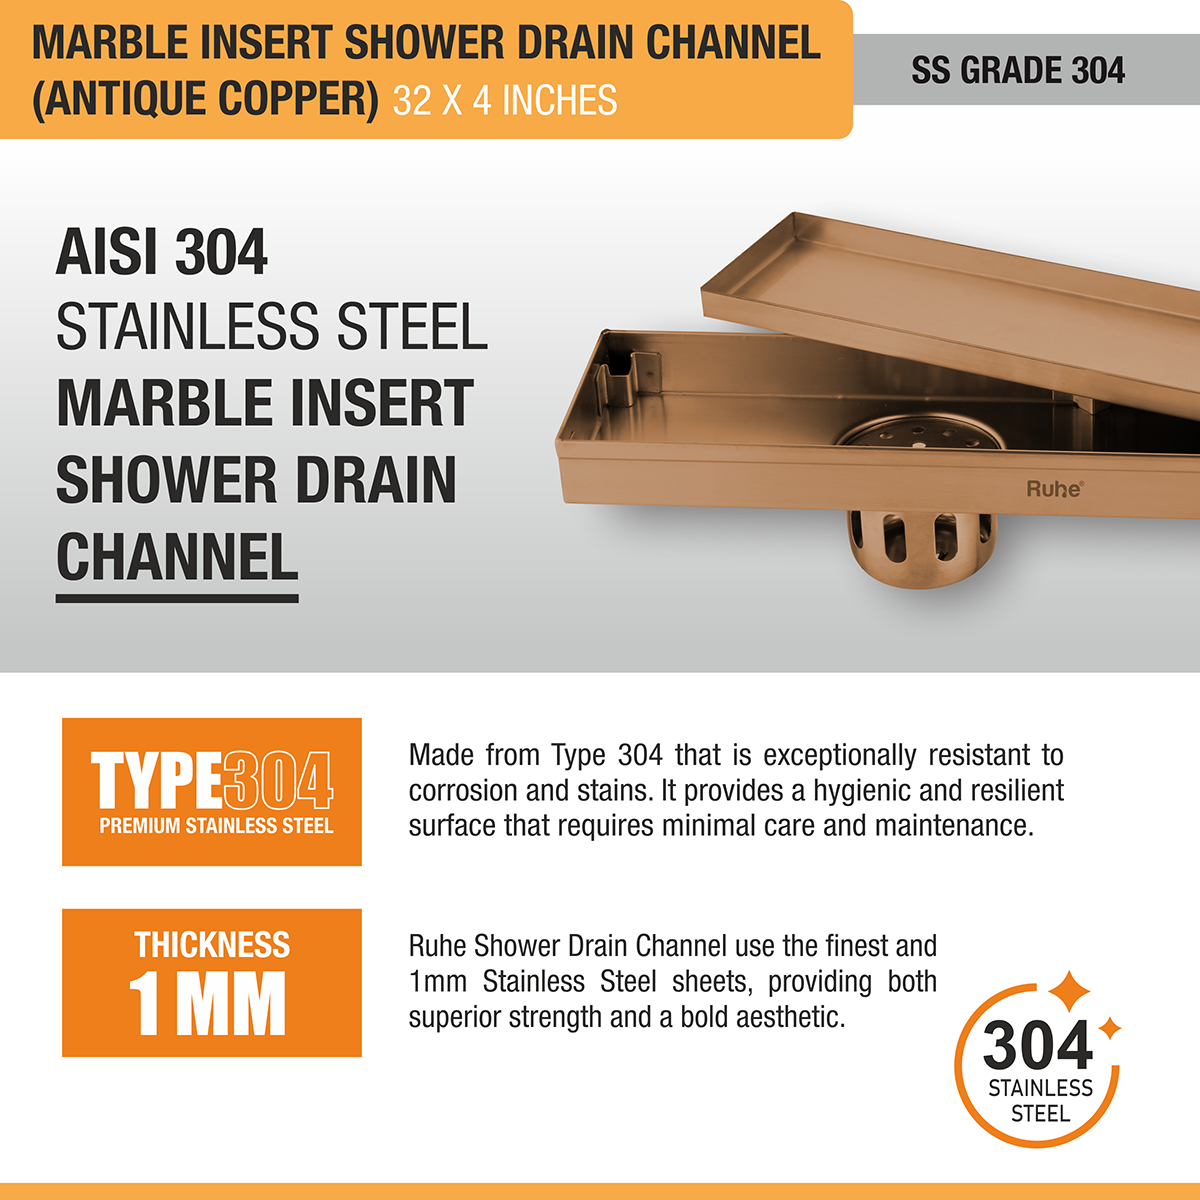 Marble Insert Shower Drain Channel (32 x 4 Inches) ROSE GOLD PVD Coated stainless steel